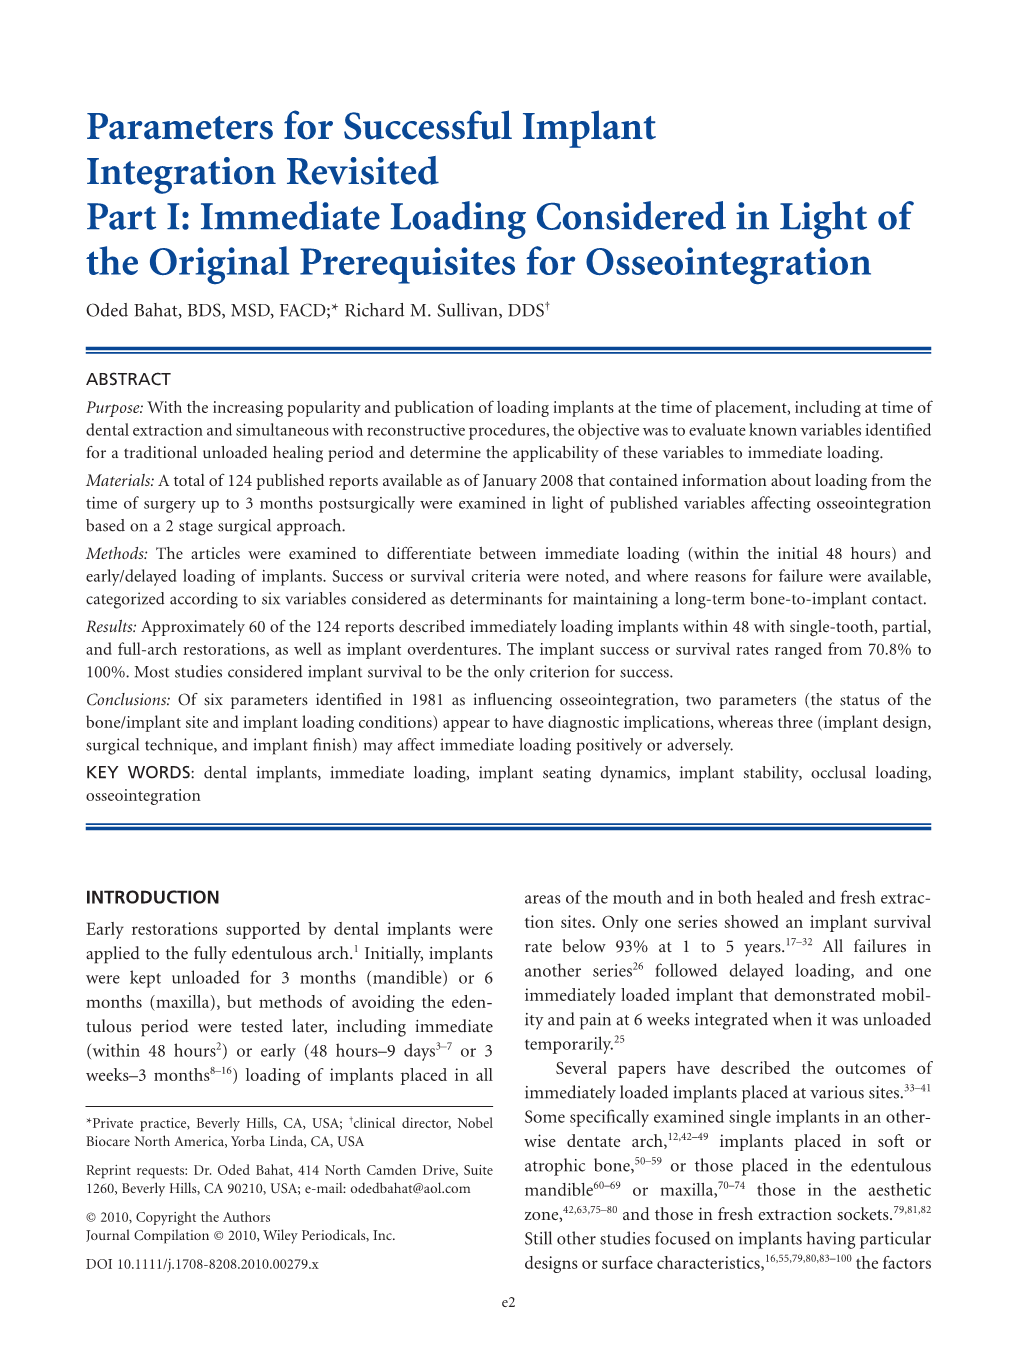 Parameters for Successful Implant Integration Revisited Part I: Immediate Loading Considered in Light Of